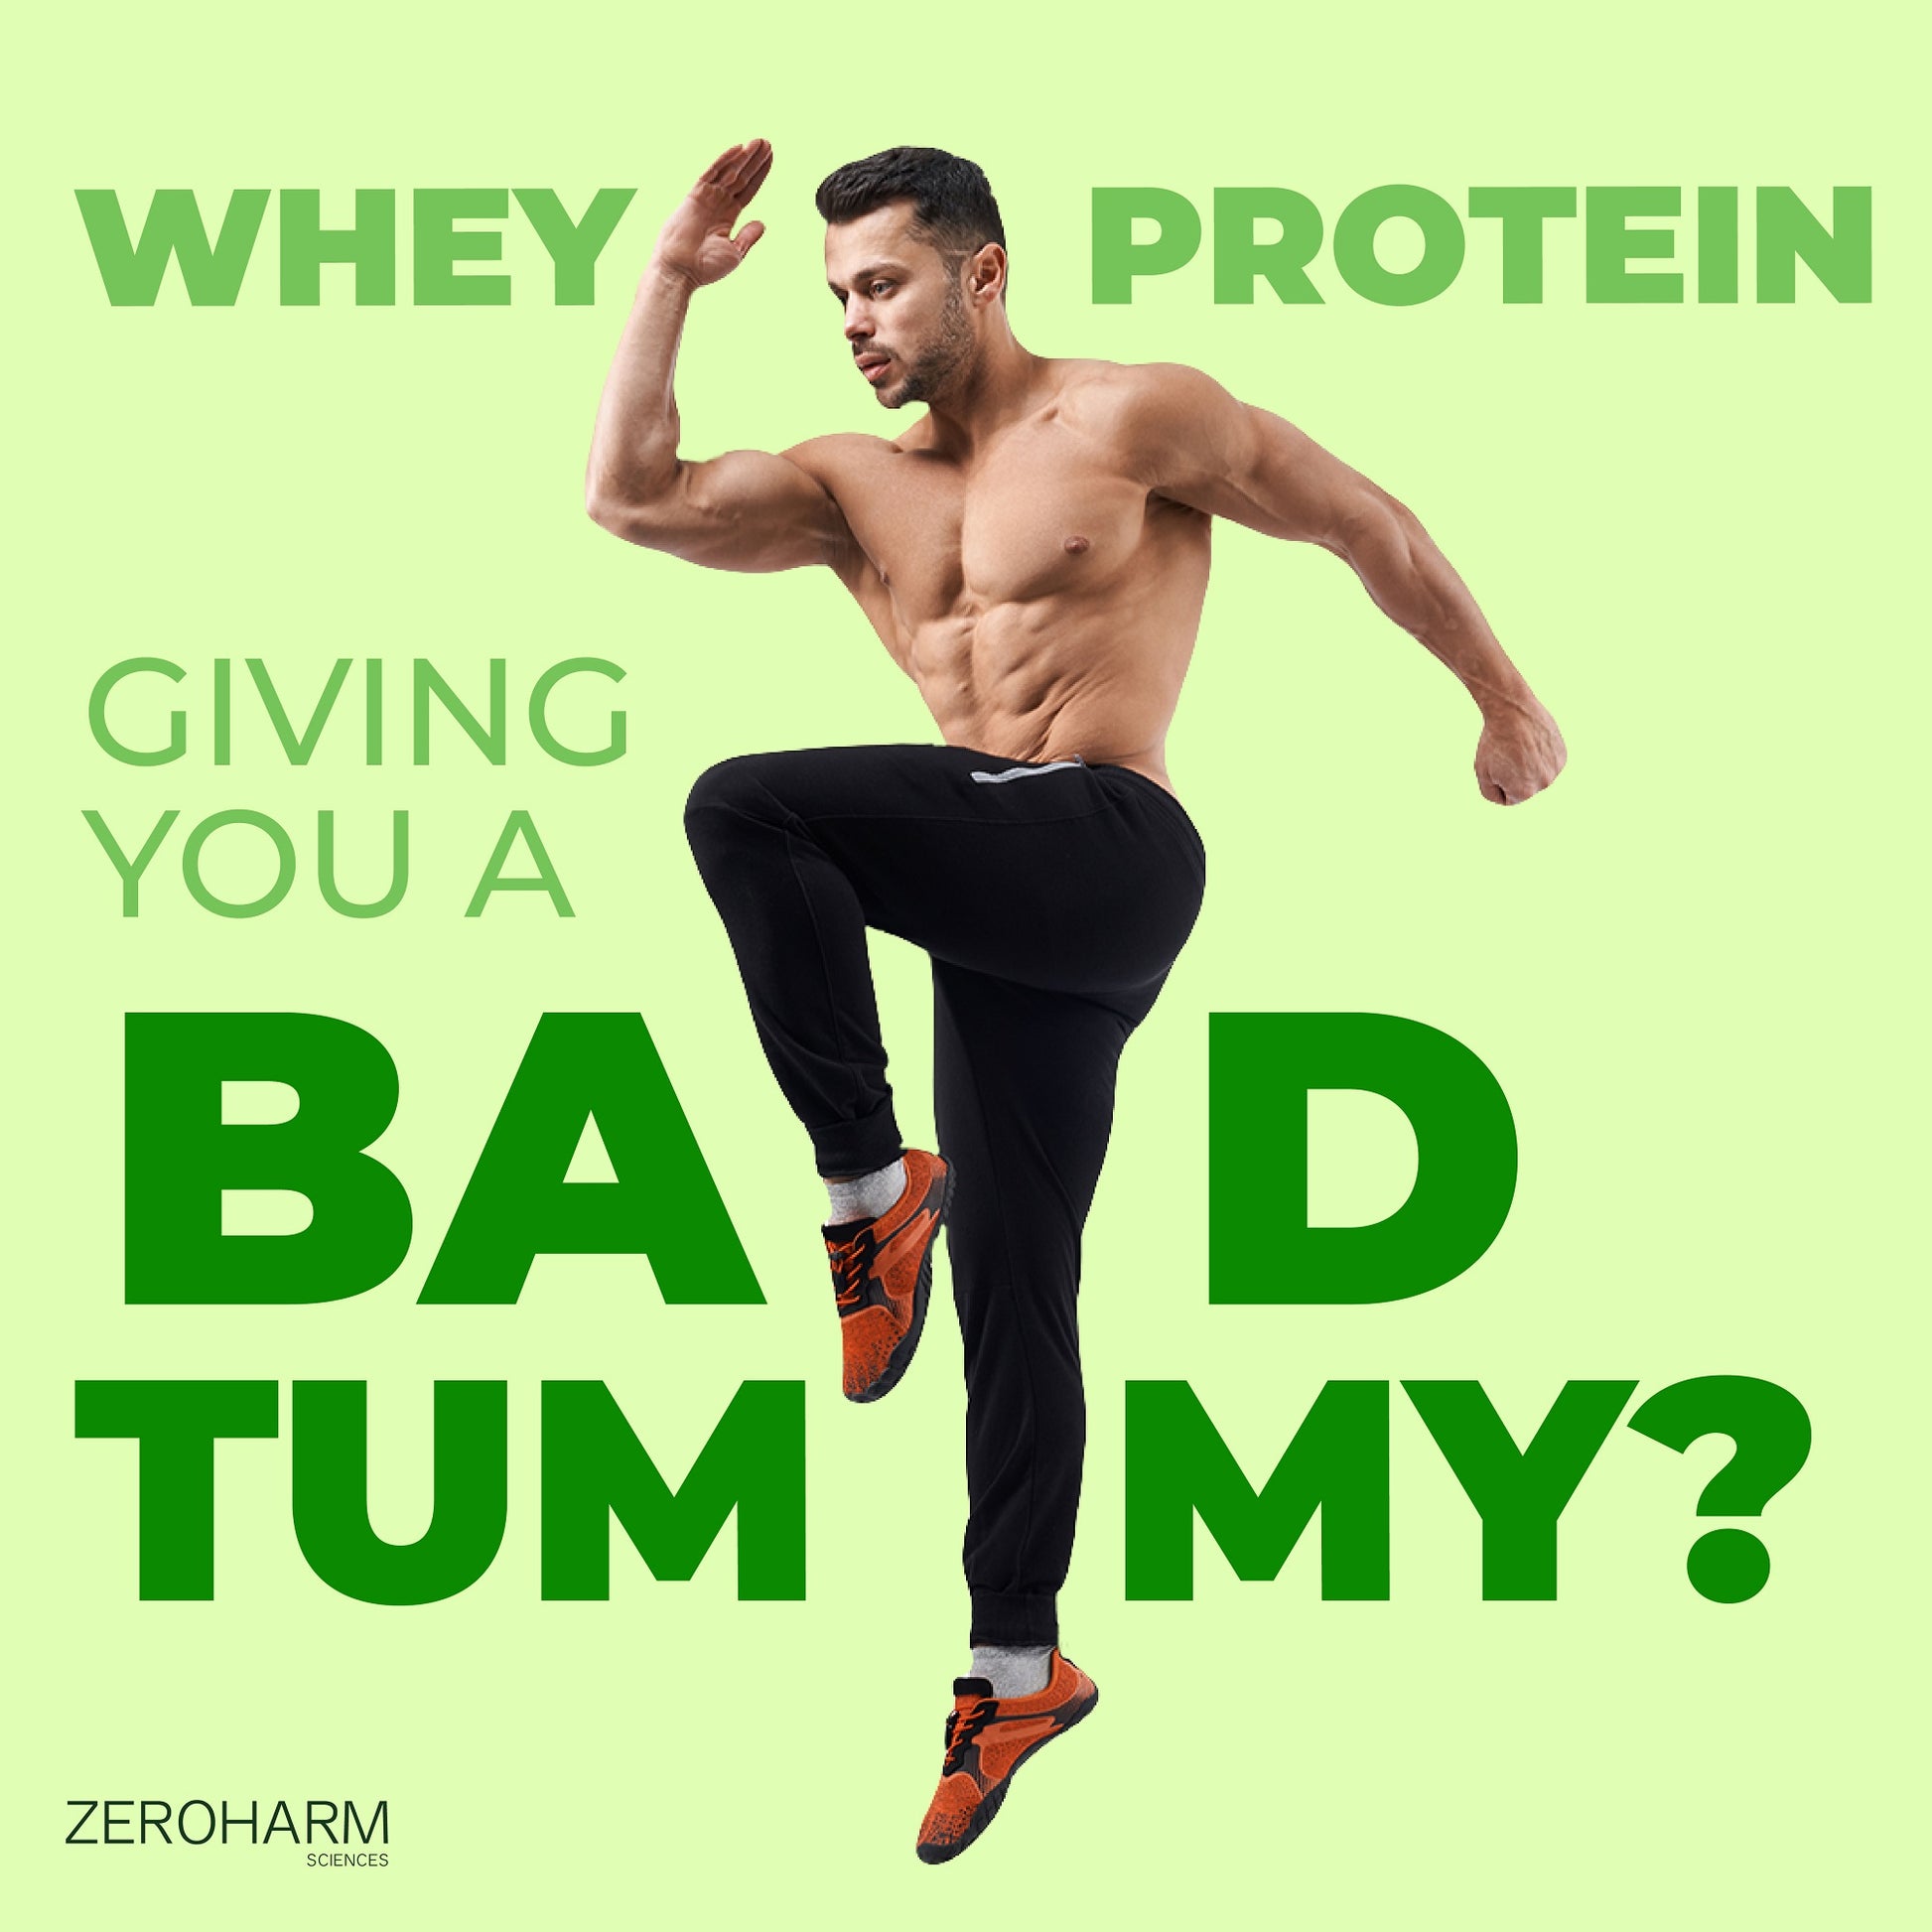 ashwagandha probiotic will help when a whey protein giving you(male athlete) a bad tummy